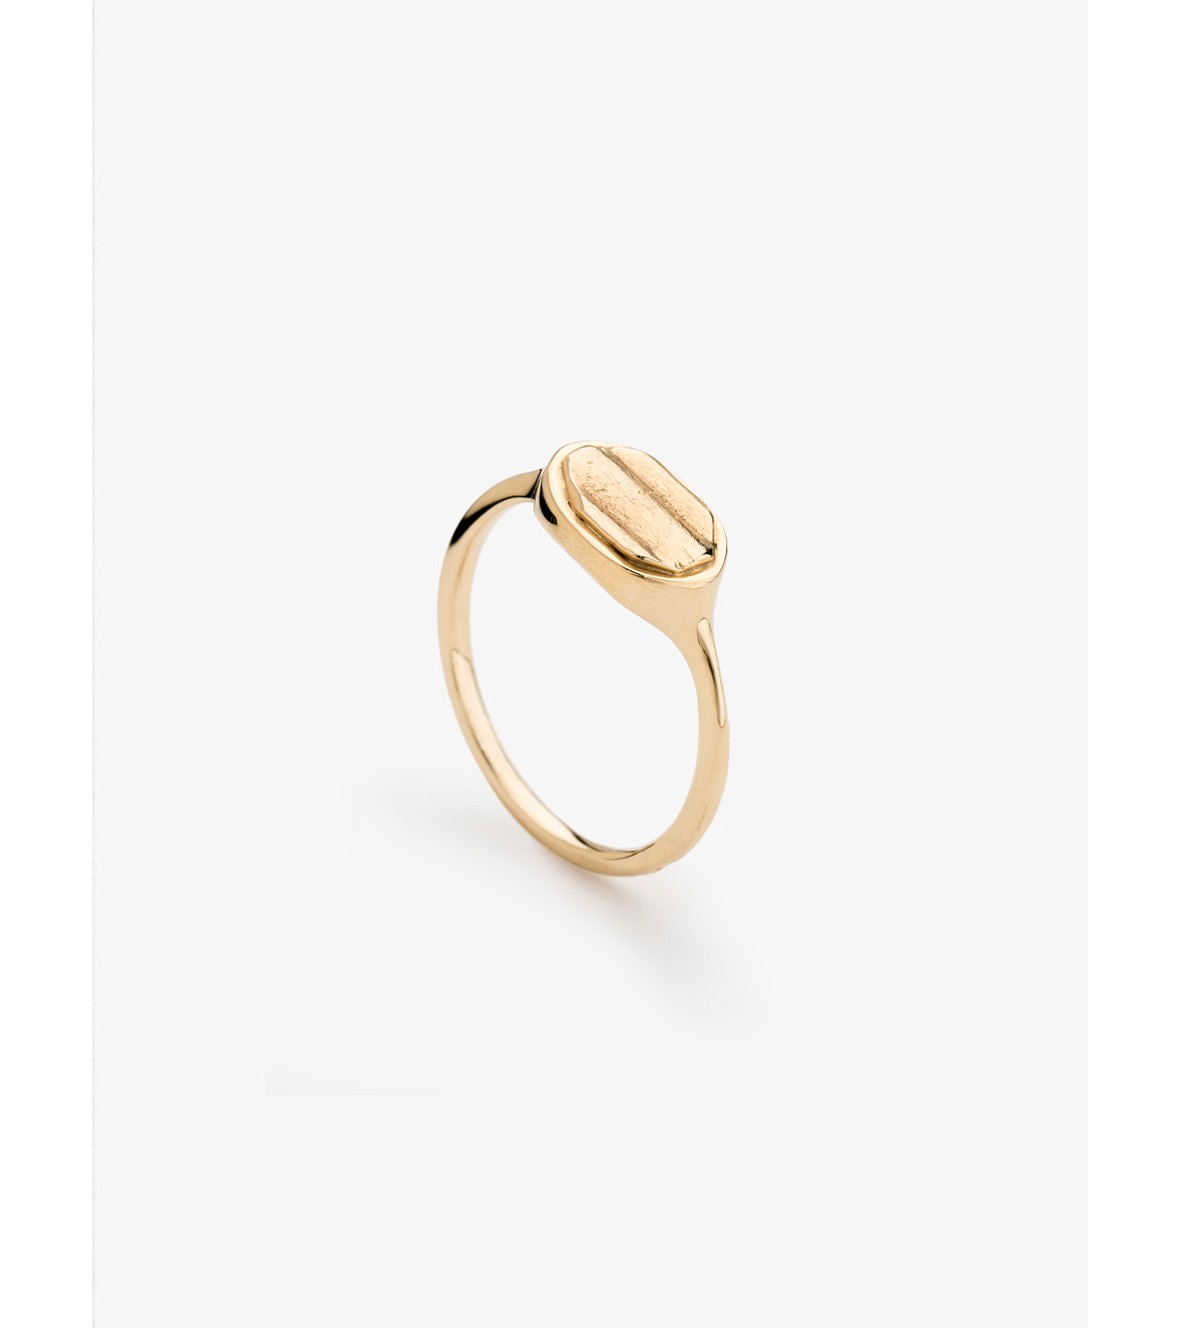 Immortelle Horizontal Ring IMMR12Y by Yiannis Sergakis